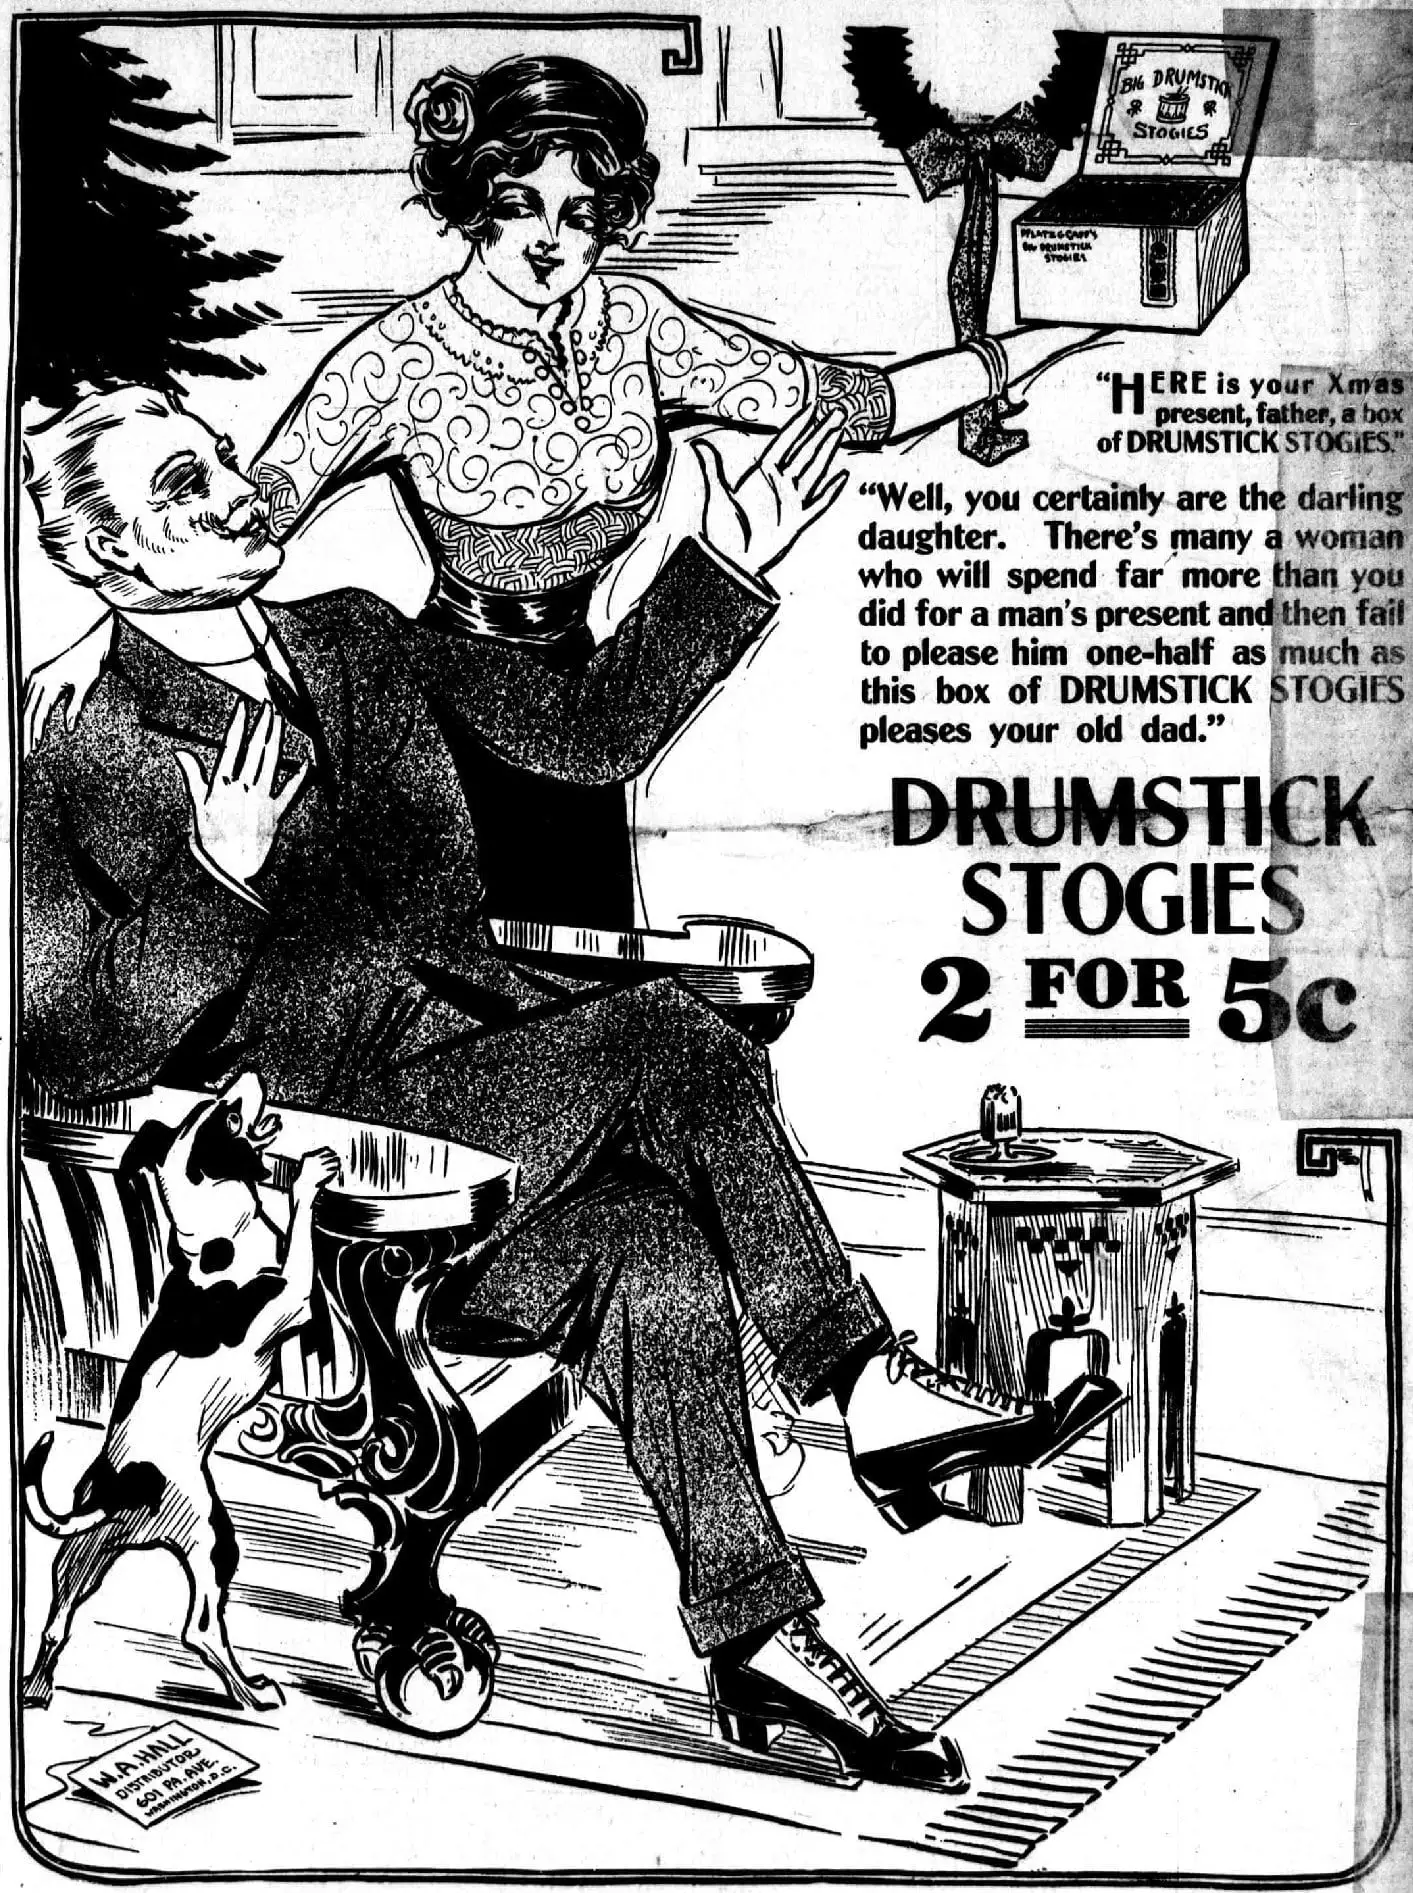 Drumstick Stogies advertisement in  the Washington Times - December 21st, 1911